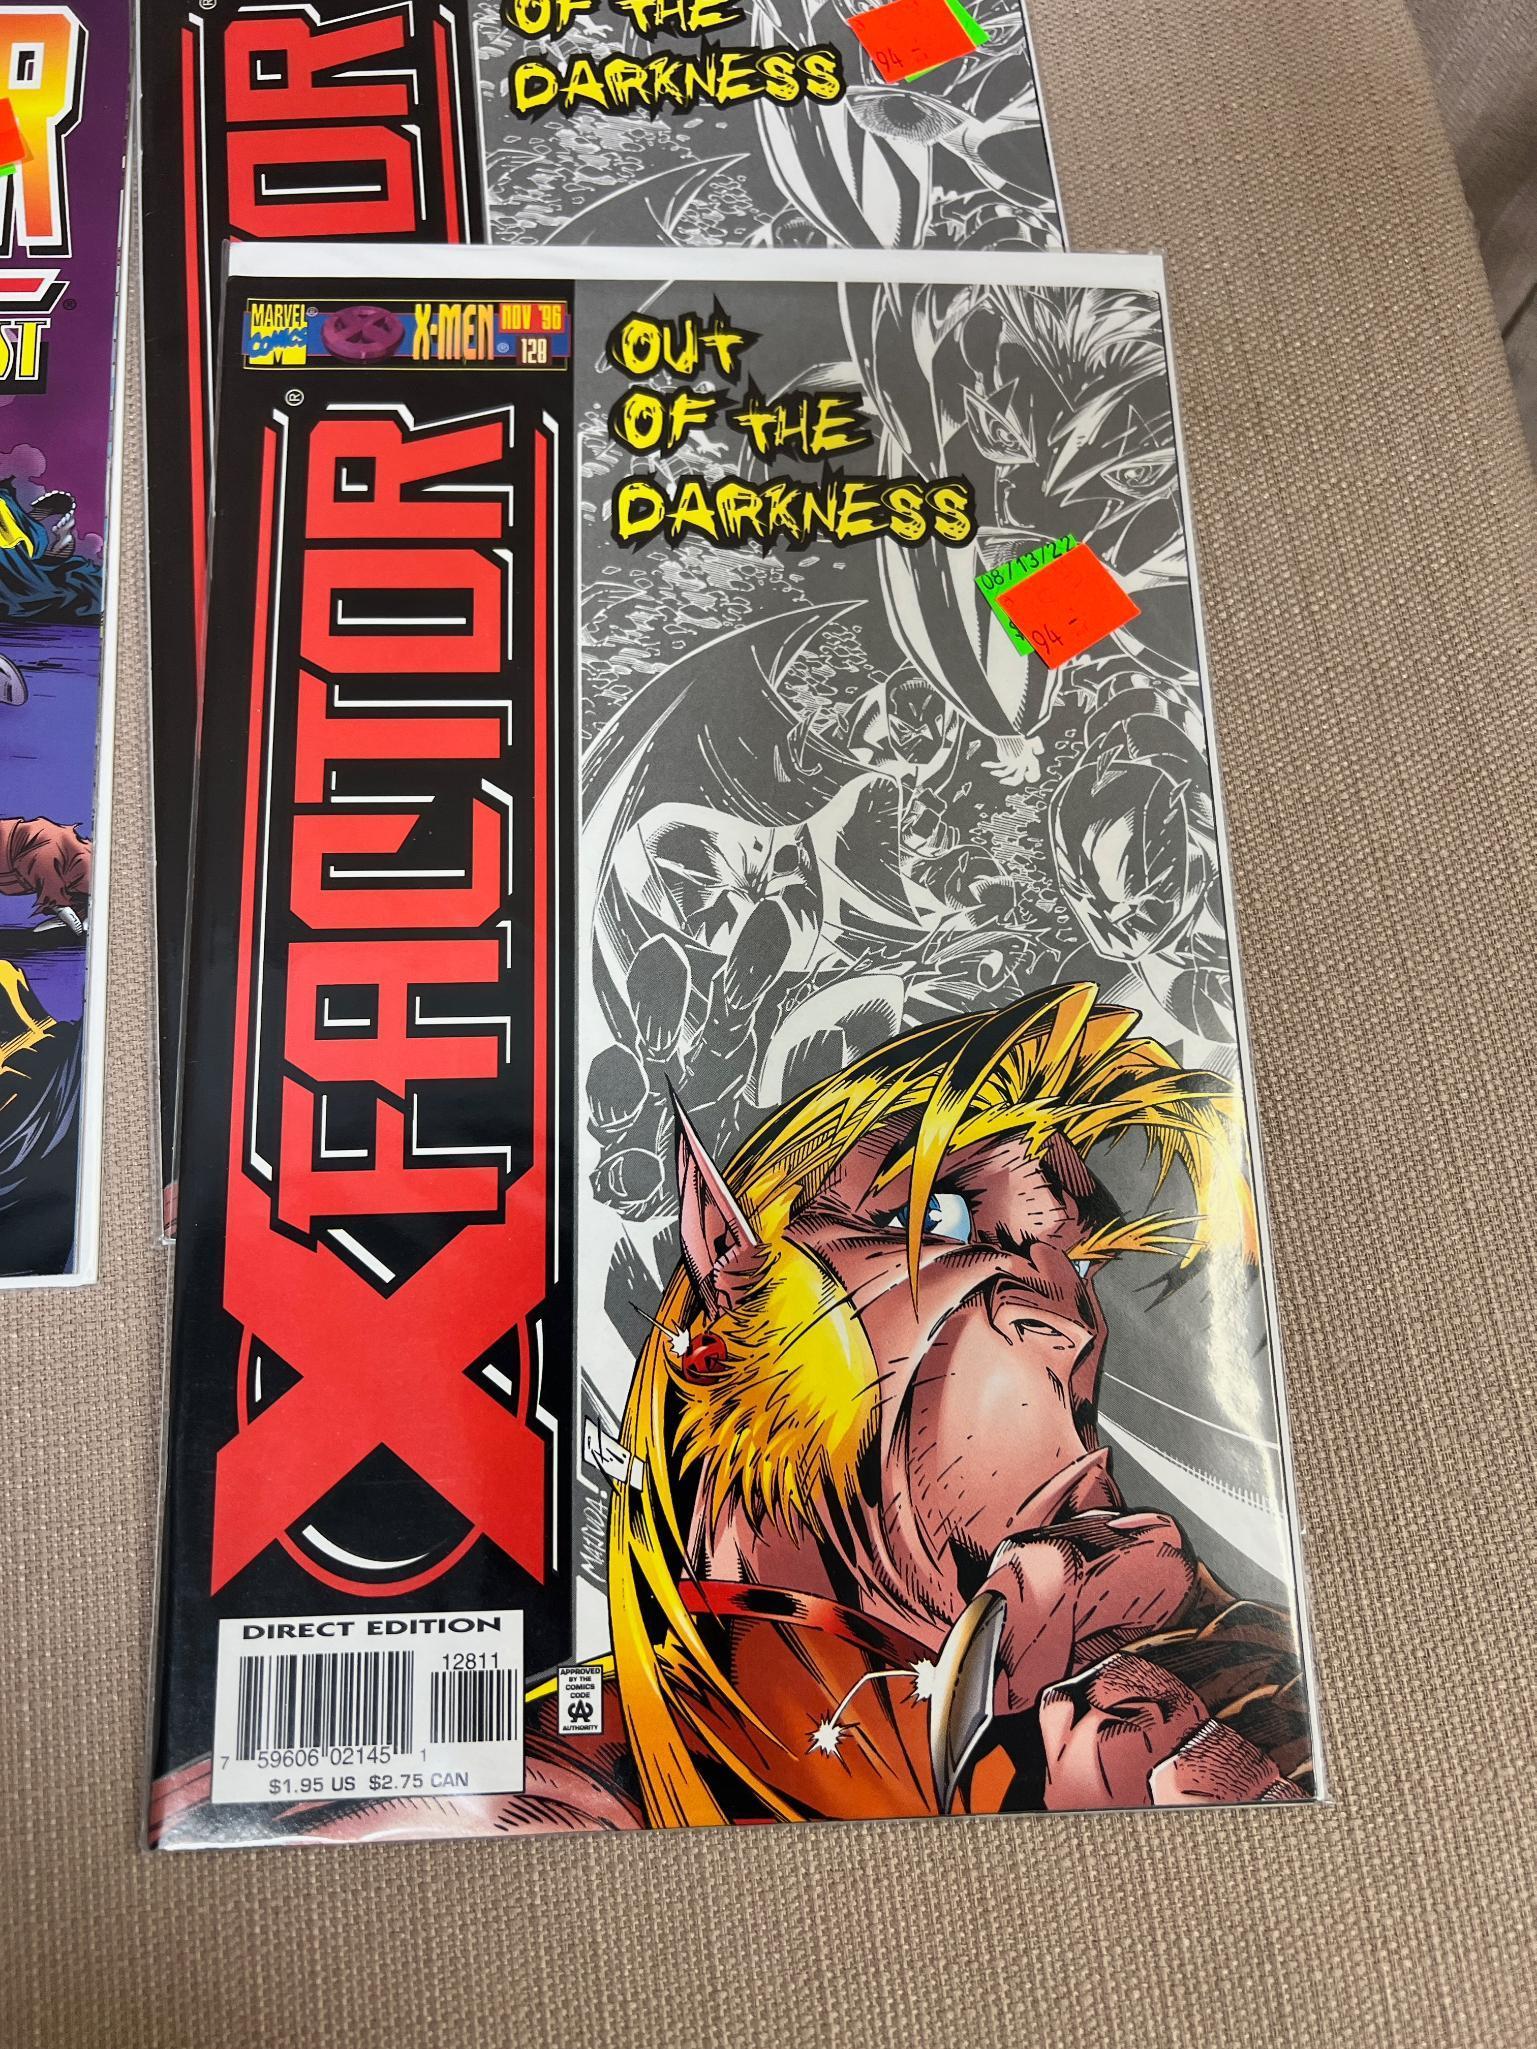 27 X Factor Comic Books Various issues incl 148 among others